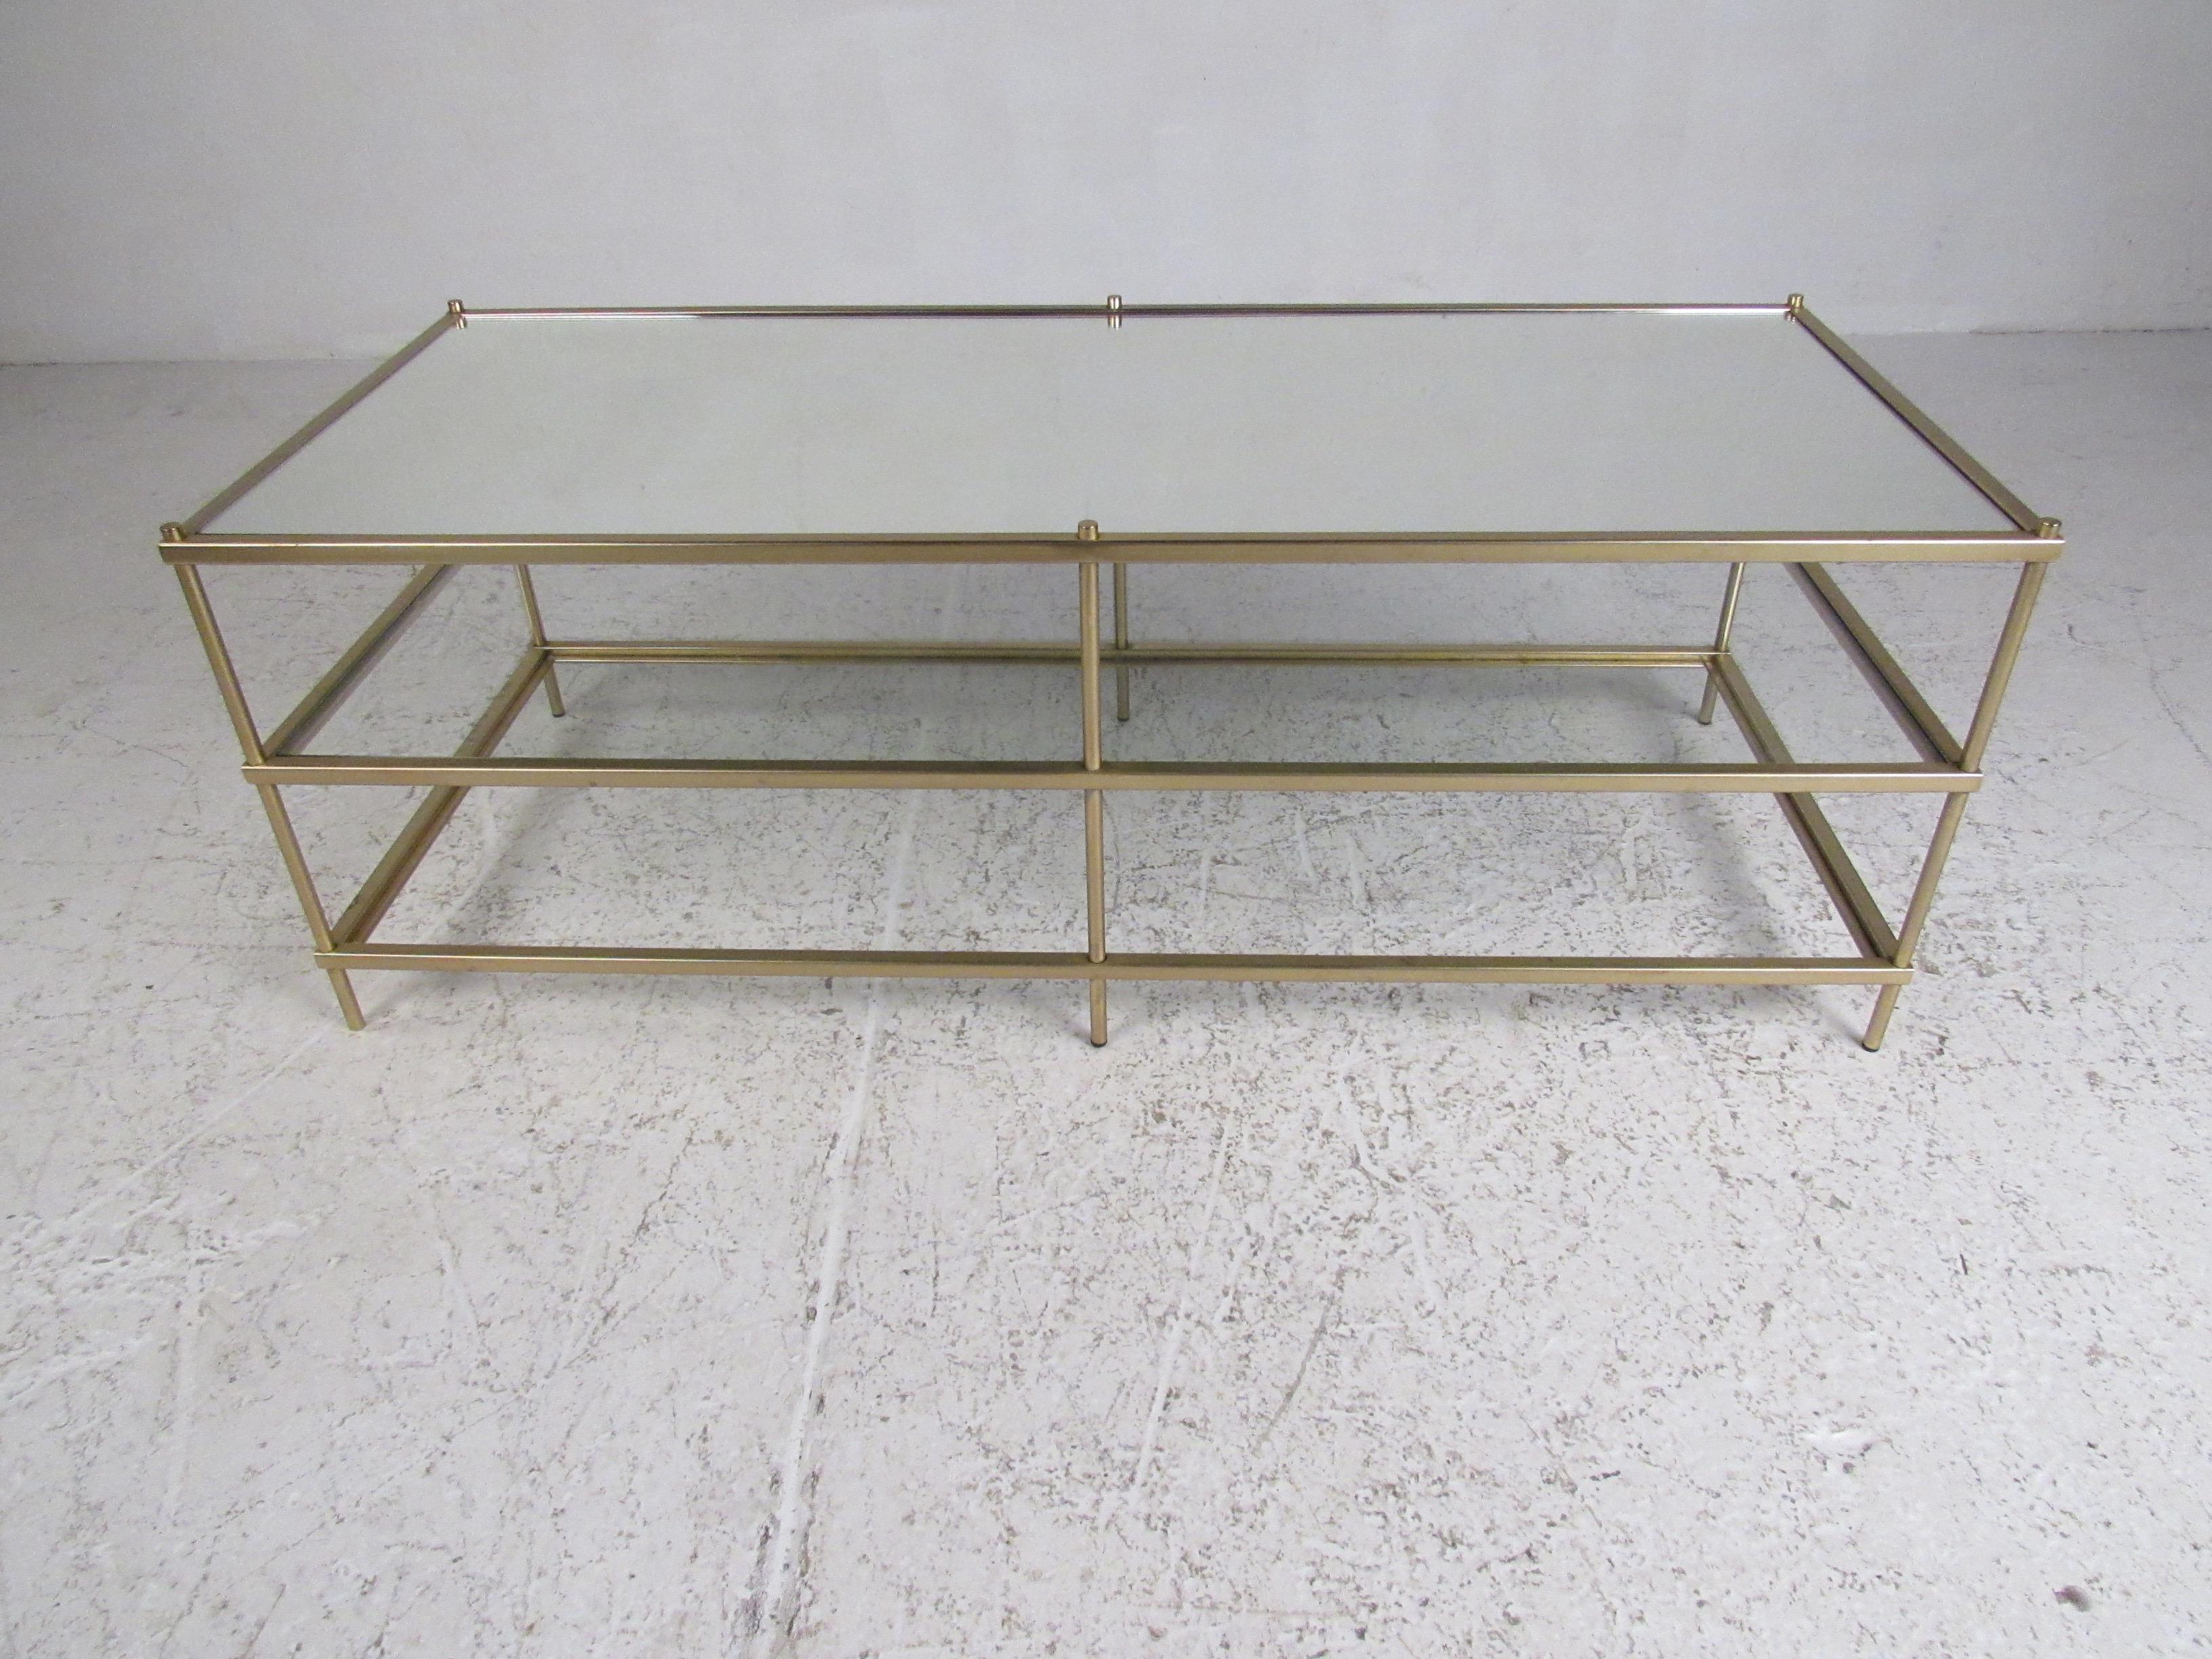 This unique vintage modern rectangle cocktail table features three tiers of glass. Sleek design with a sturdy bar metal frame connecting each tier. This unusual table allows for extra storage or gives one the ability to display items in between each